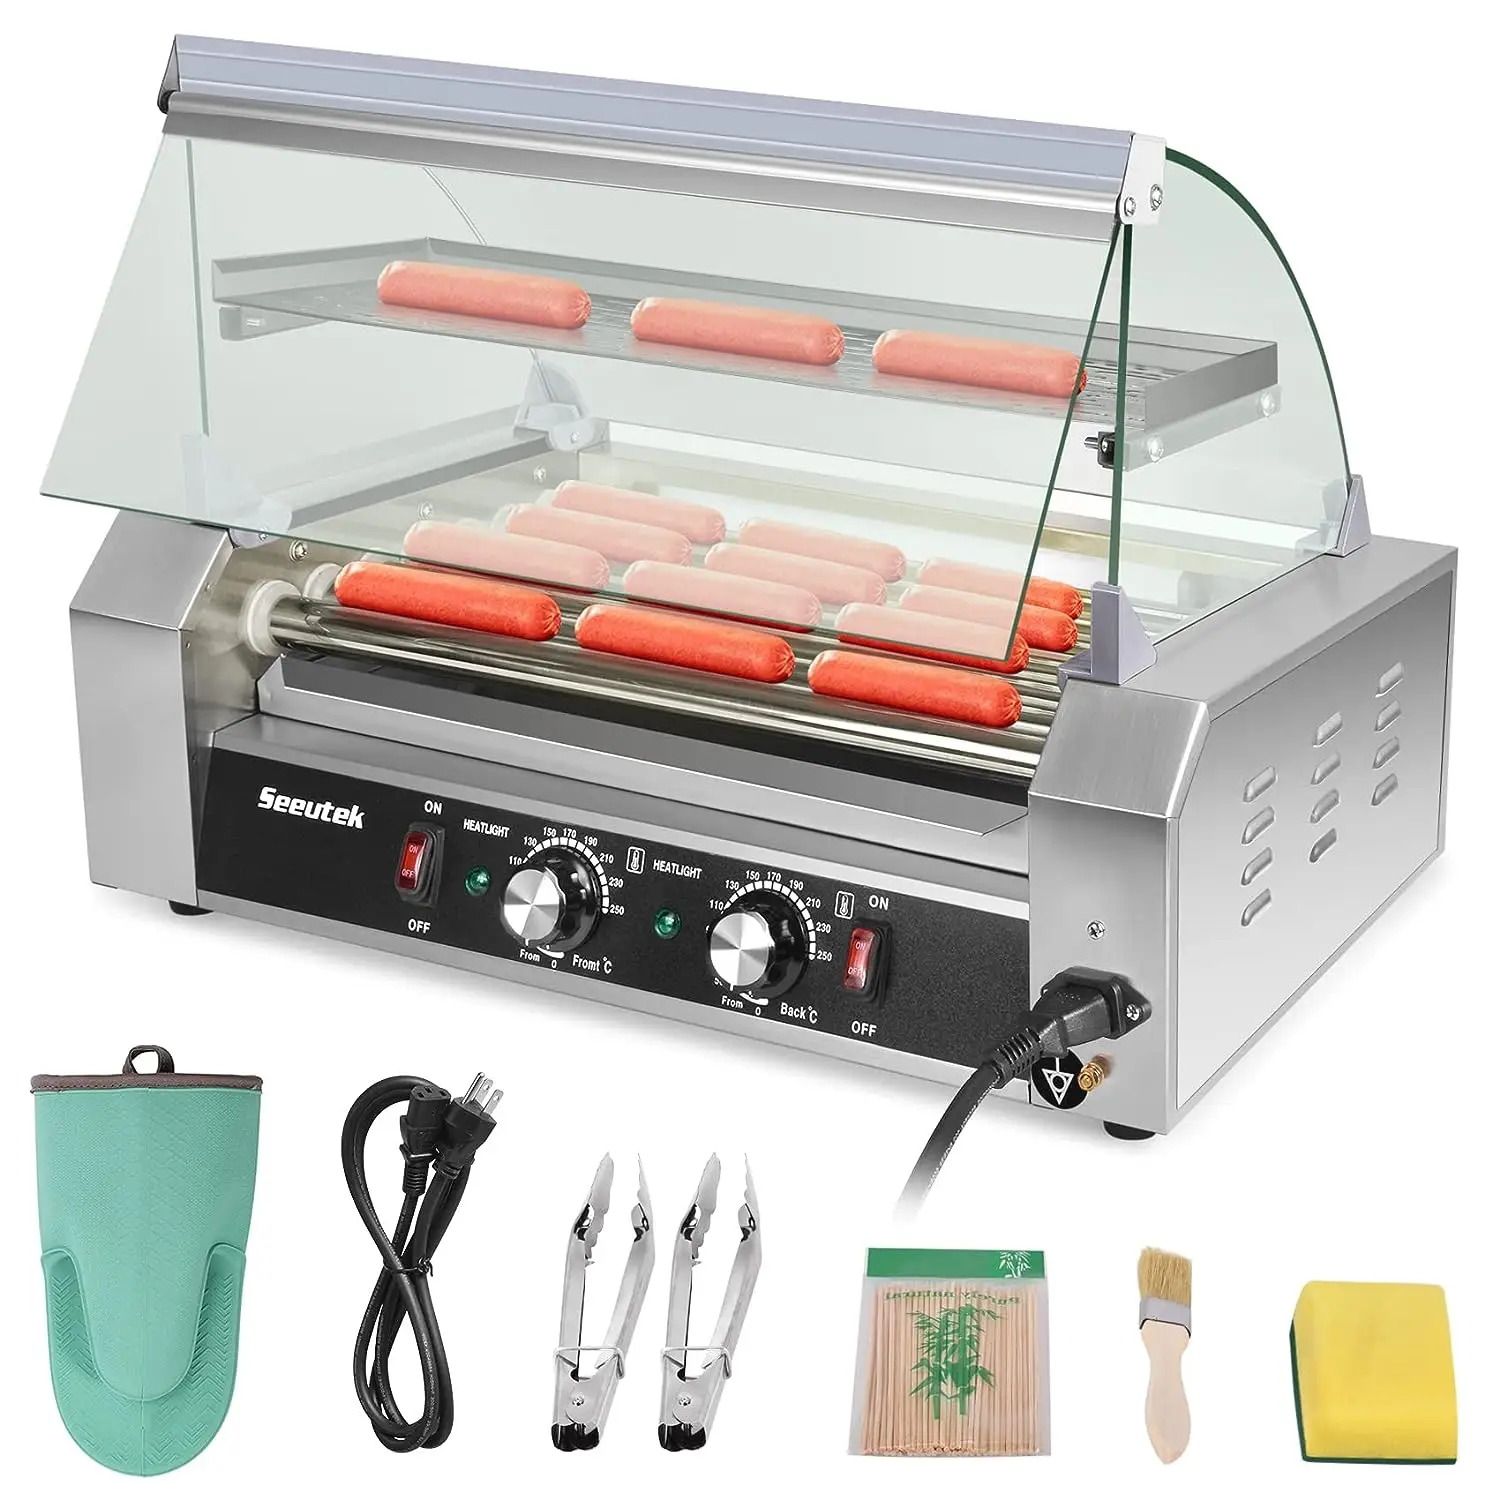 

Hot Dog Roller Machine, 7 Stainless Steel Hot Dog Rollers with Mesh , Dust Cover, Oil Pan, Dual Temp Control and LED Light, 18 H